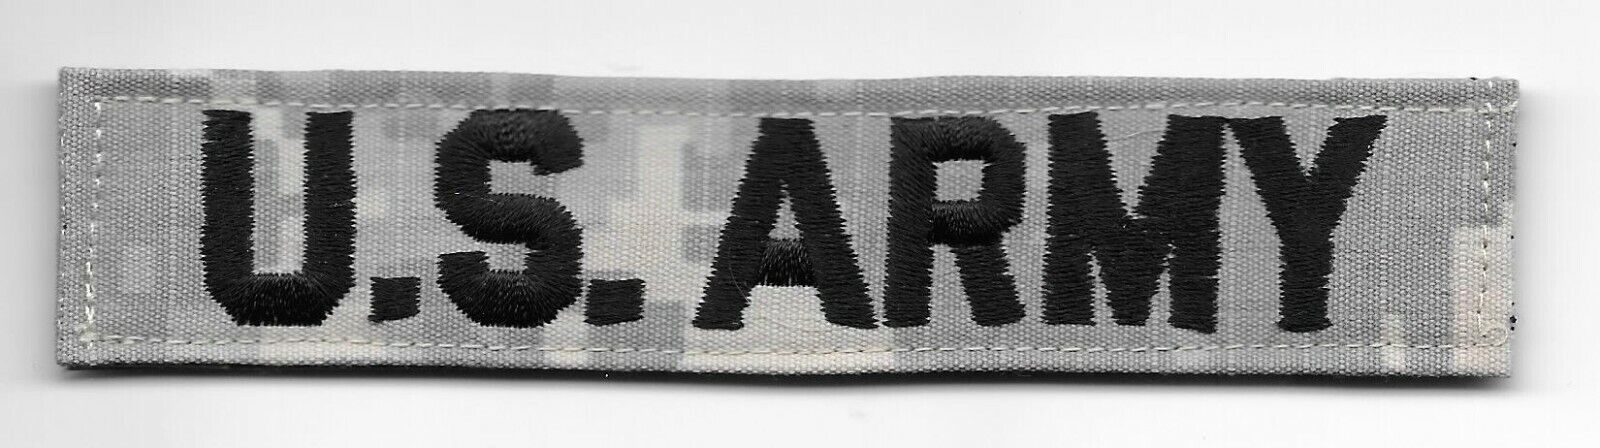 2nd Quality ACU ARMY Distinguishing Name Tape Patch Fits For VELCRO® BRAND Loop 